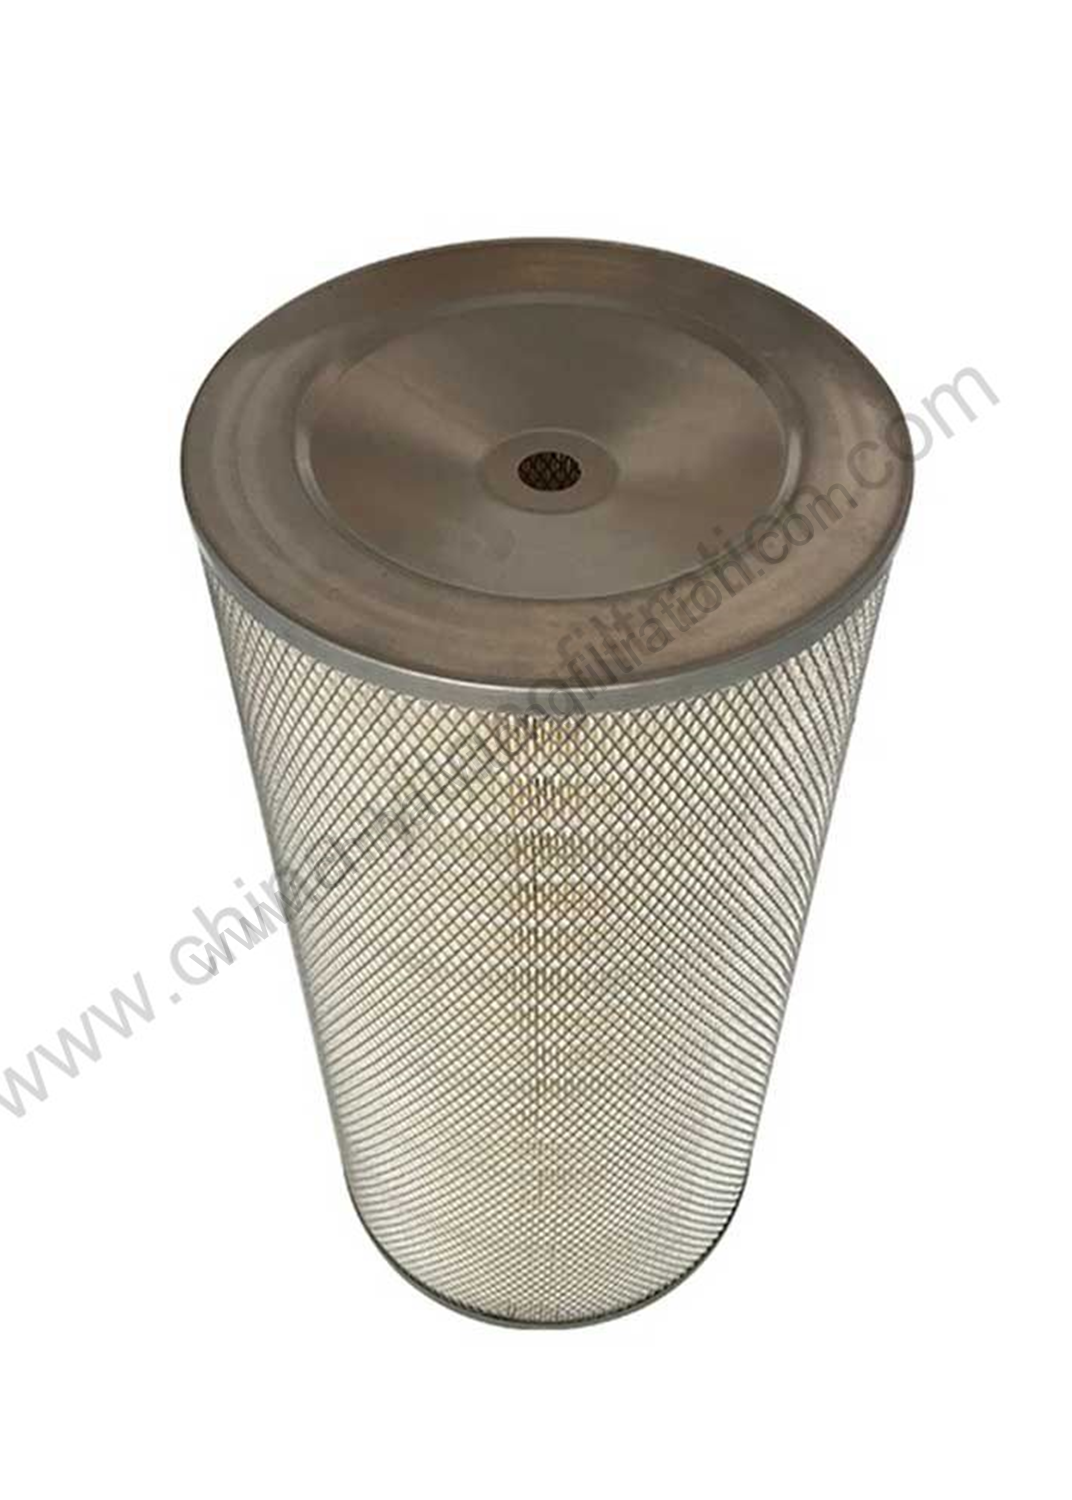 Filter Cartridge For Air Inlet Purification